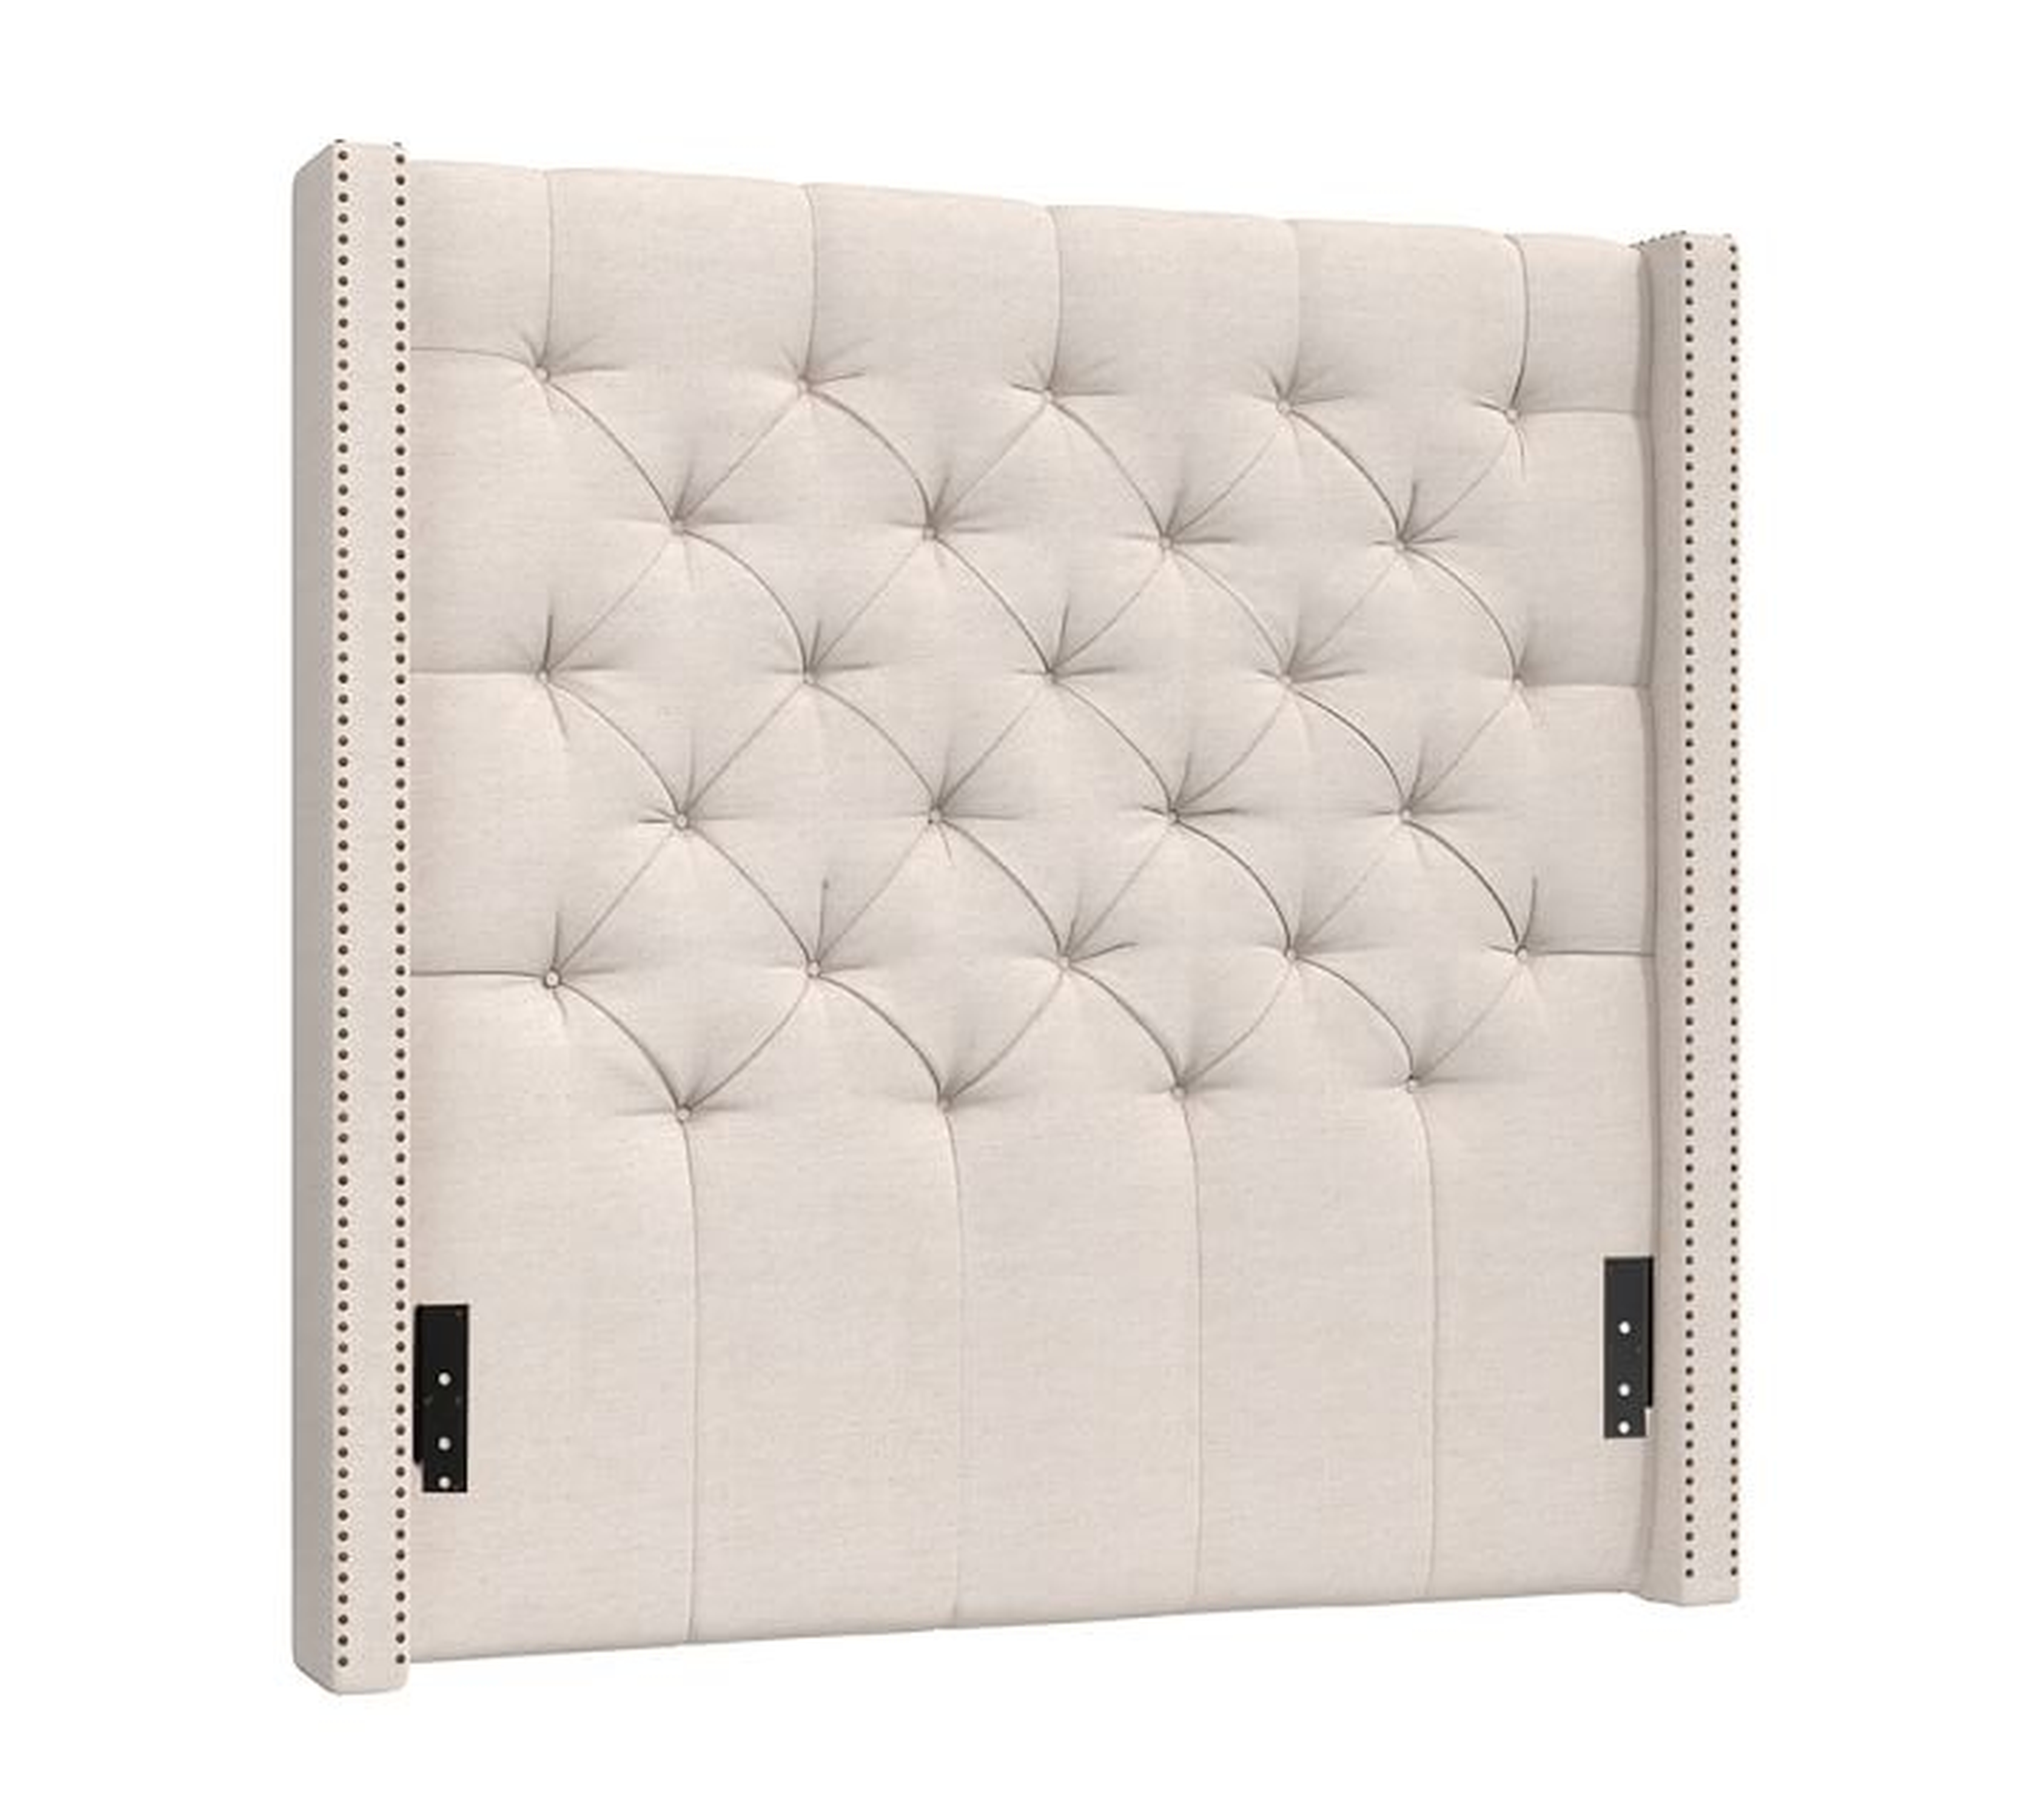 Harper Upholstered Tufted Tall Headboard with Pewter Nailheads, Queen, Twill Cream - Pottery Barn